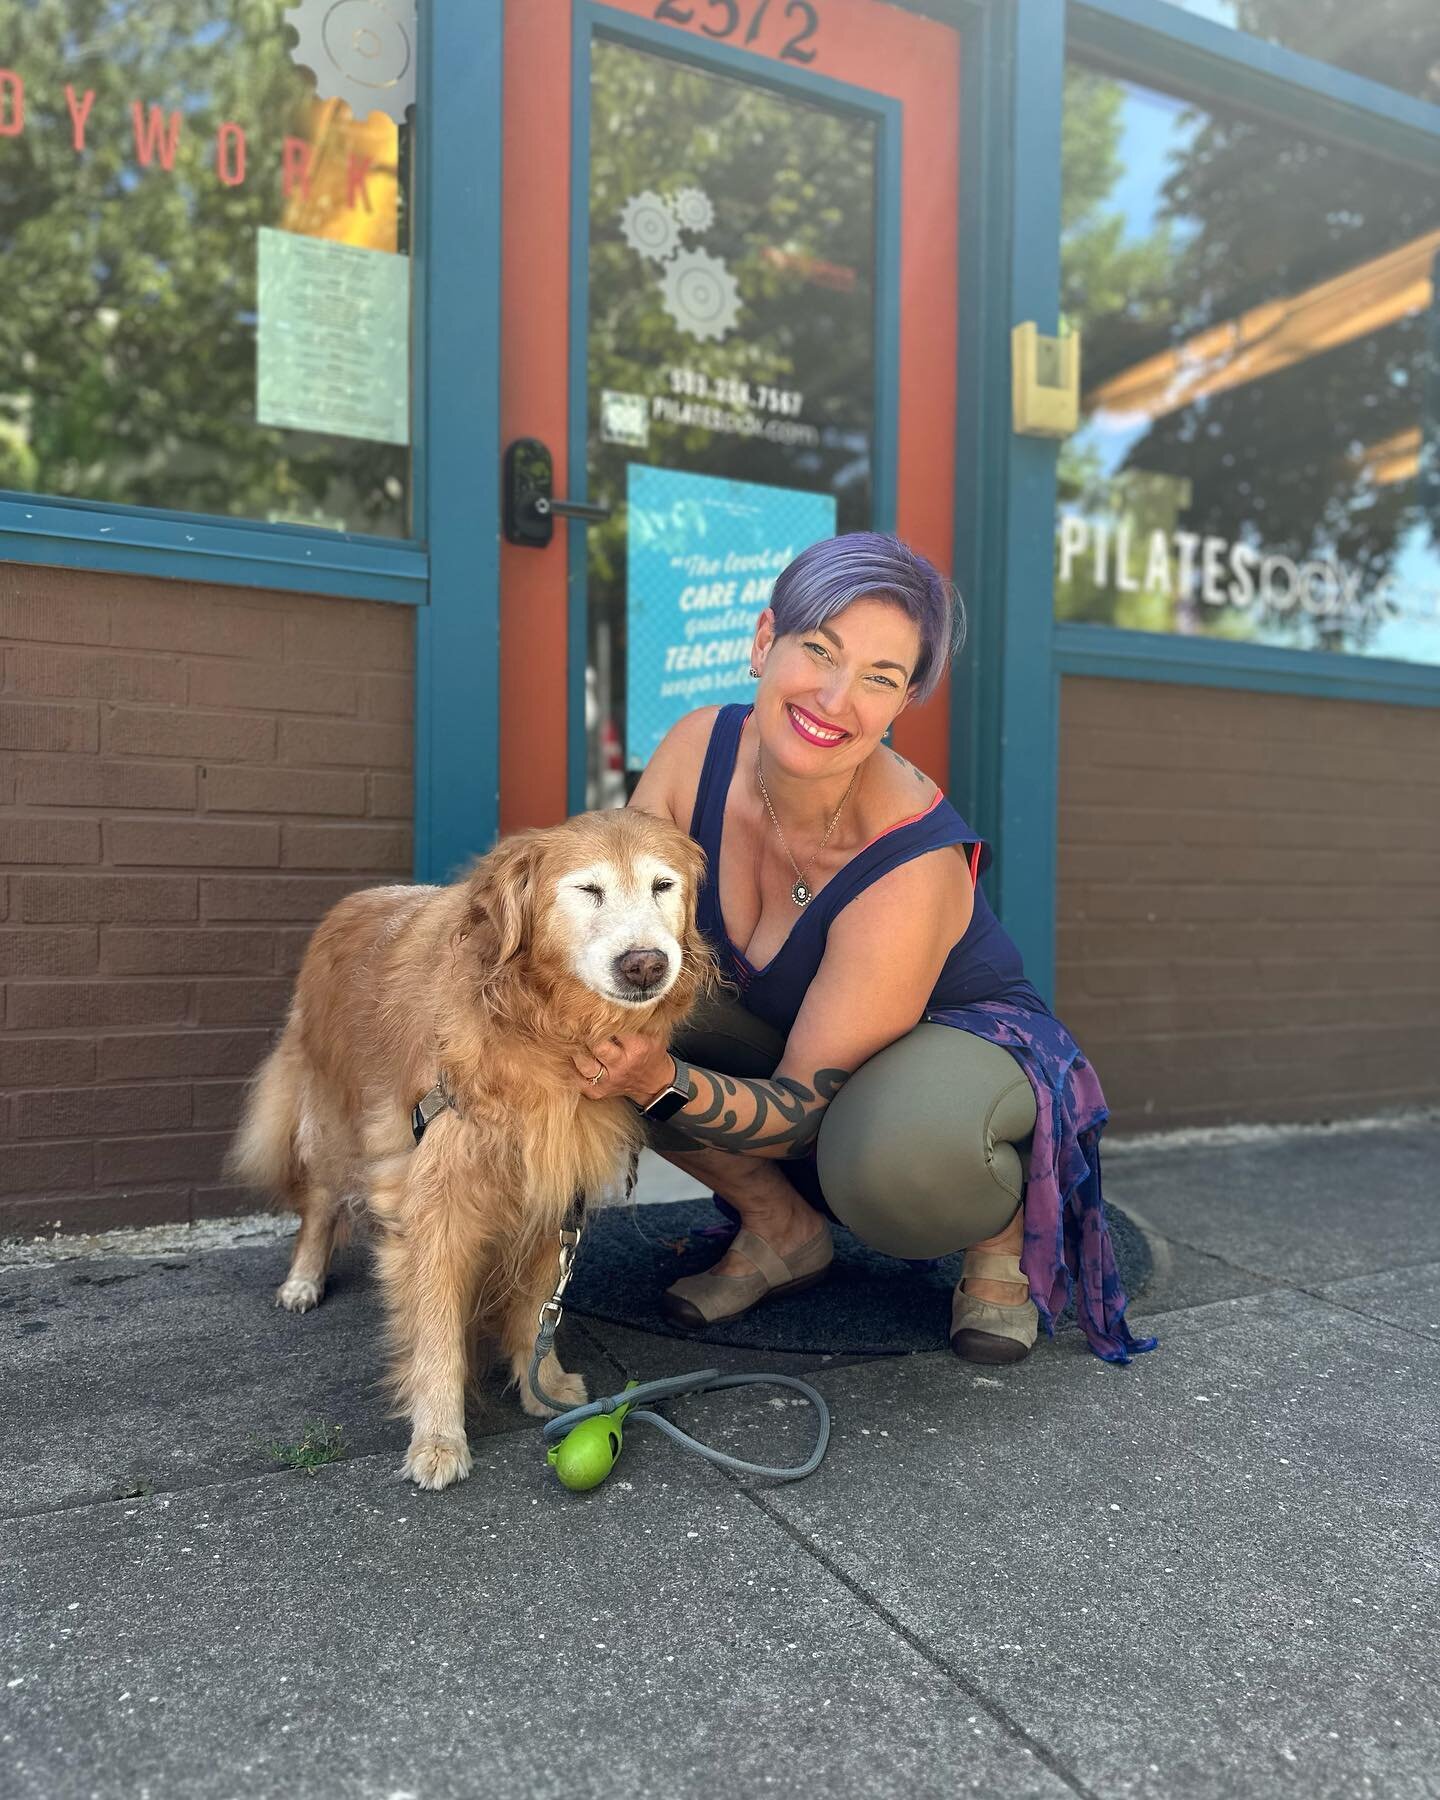 bodymechanics is the studio where ALL dogs can learn new tricks 🐾💕

#smallbusiness #pdxsmallbusiness #pdxstudio #pilatesstudio #pilatesportland #pilatespdx #womanowned